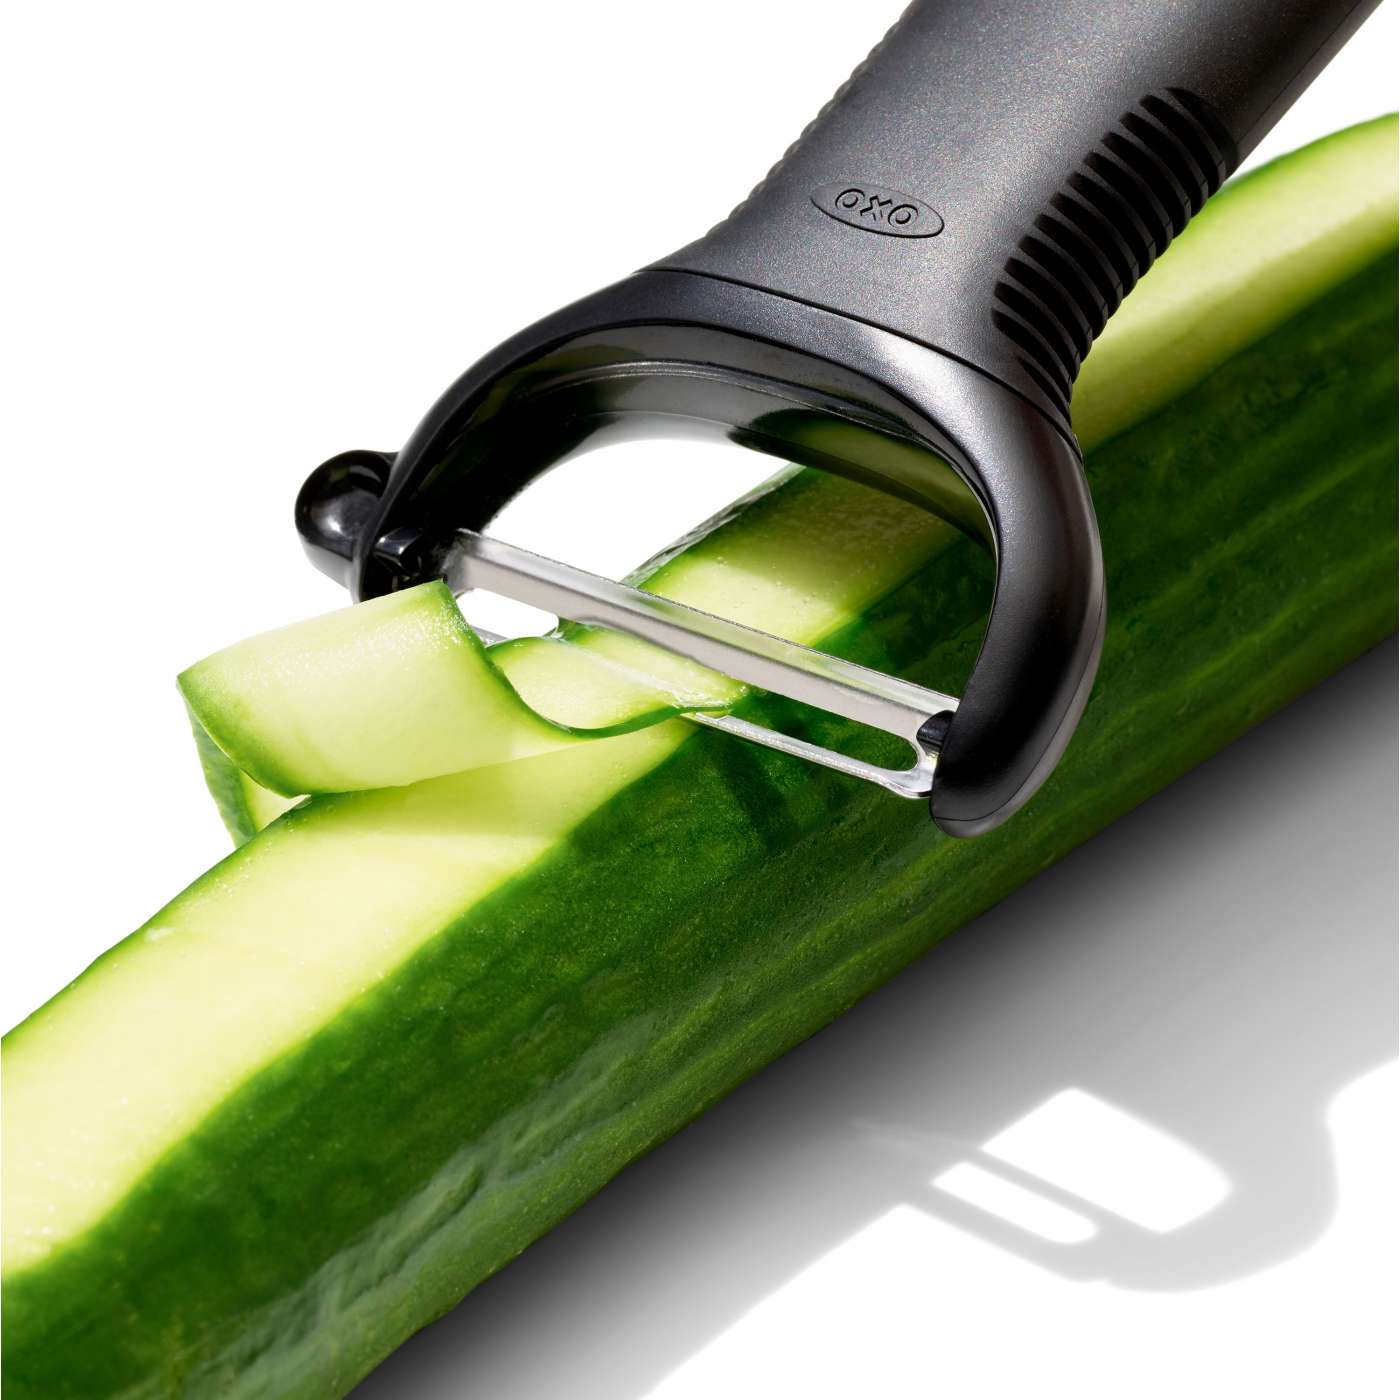 Hands-On With the OXO Good Grips Peeler